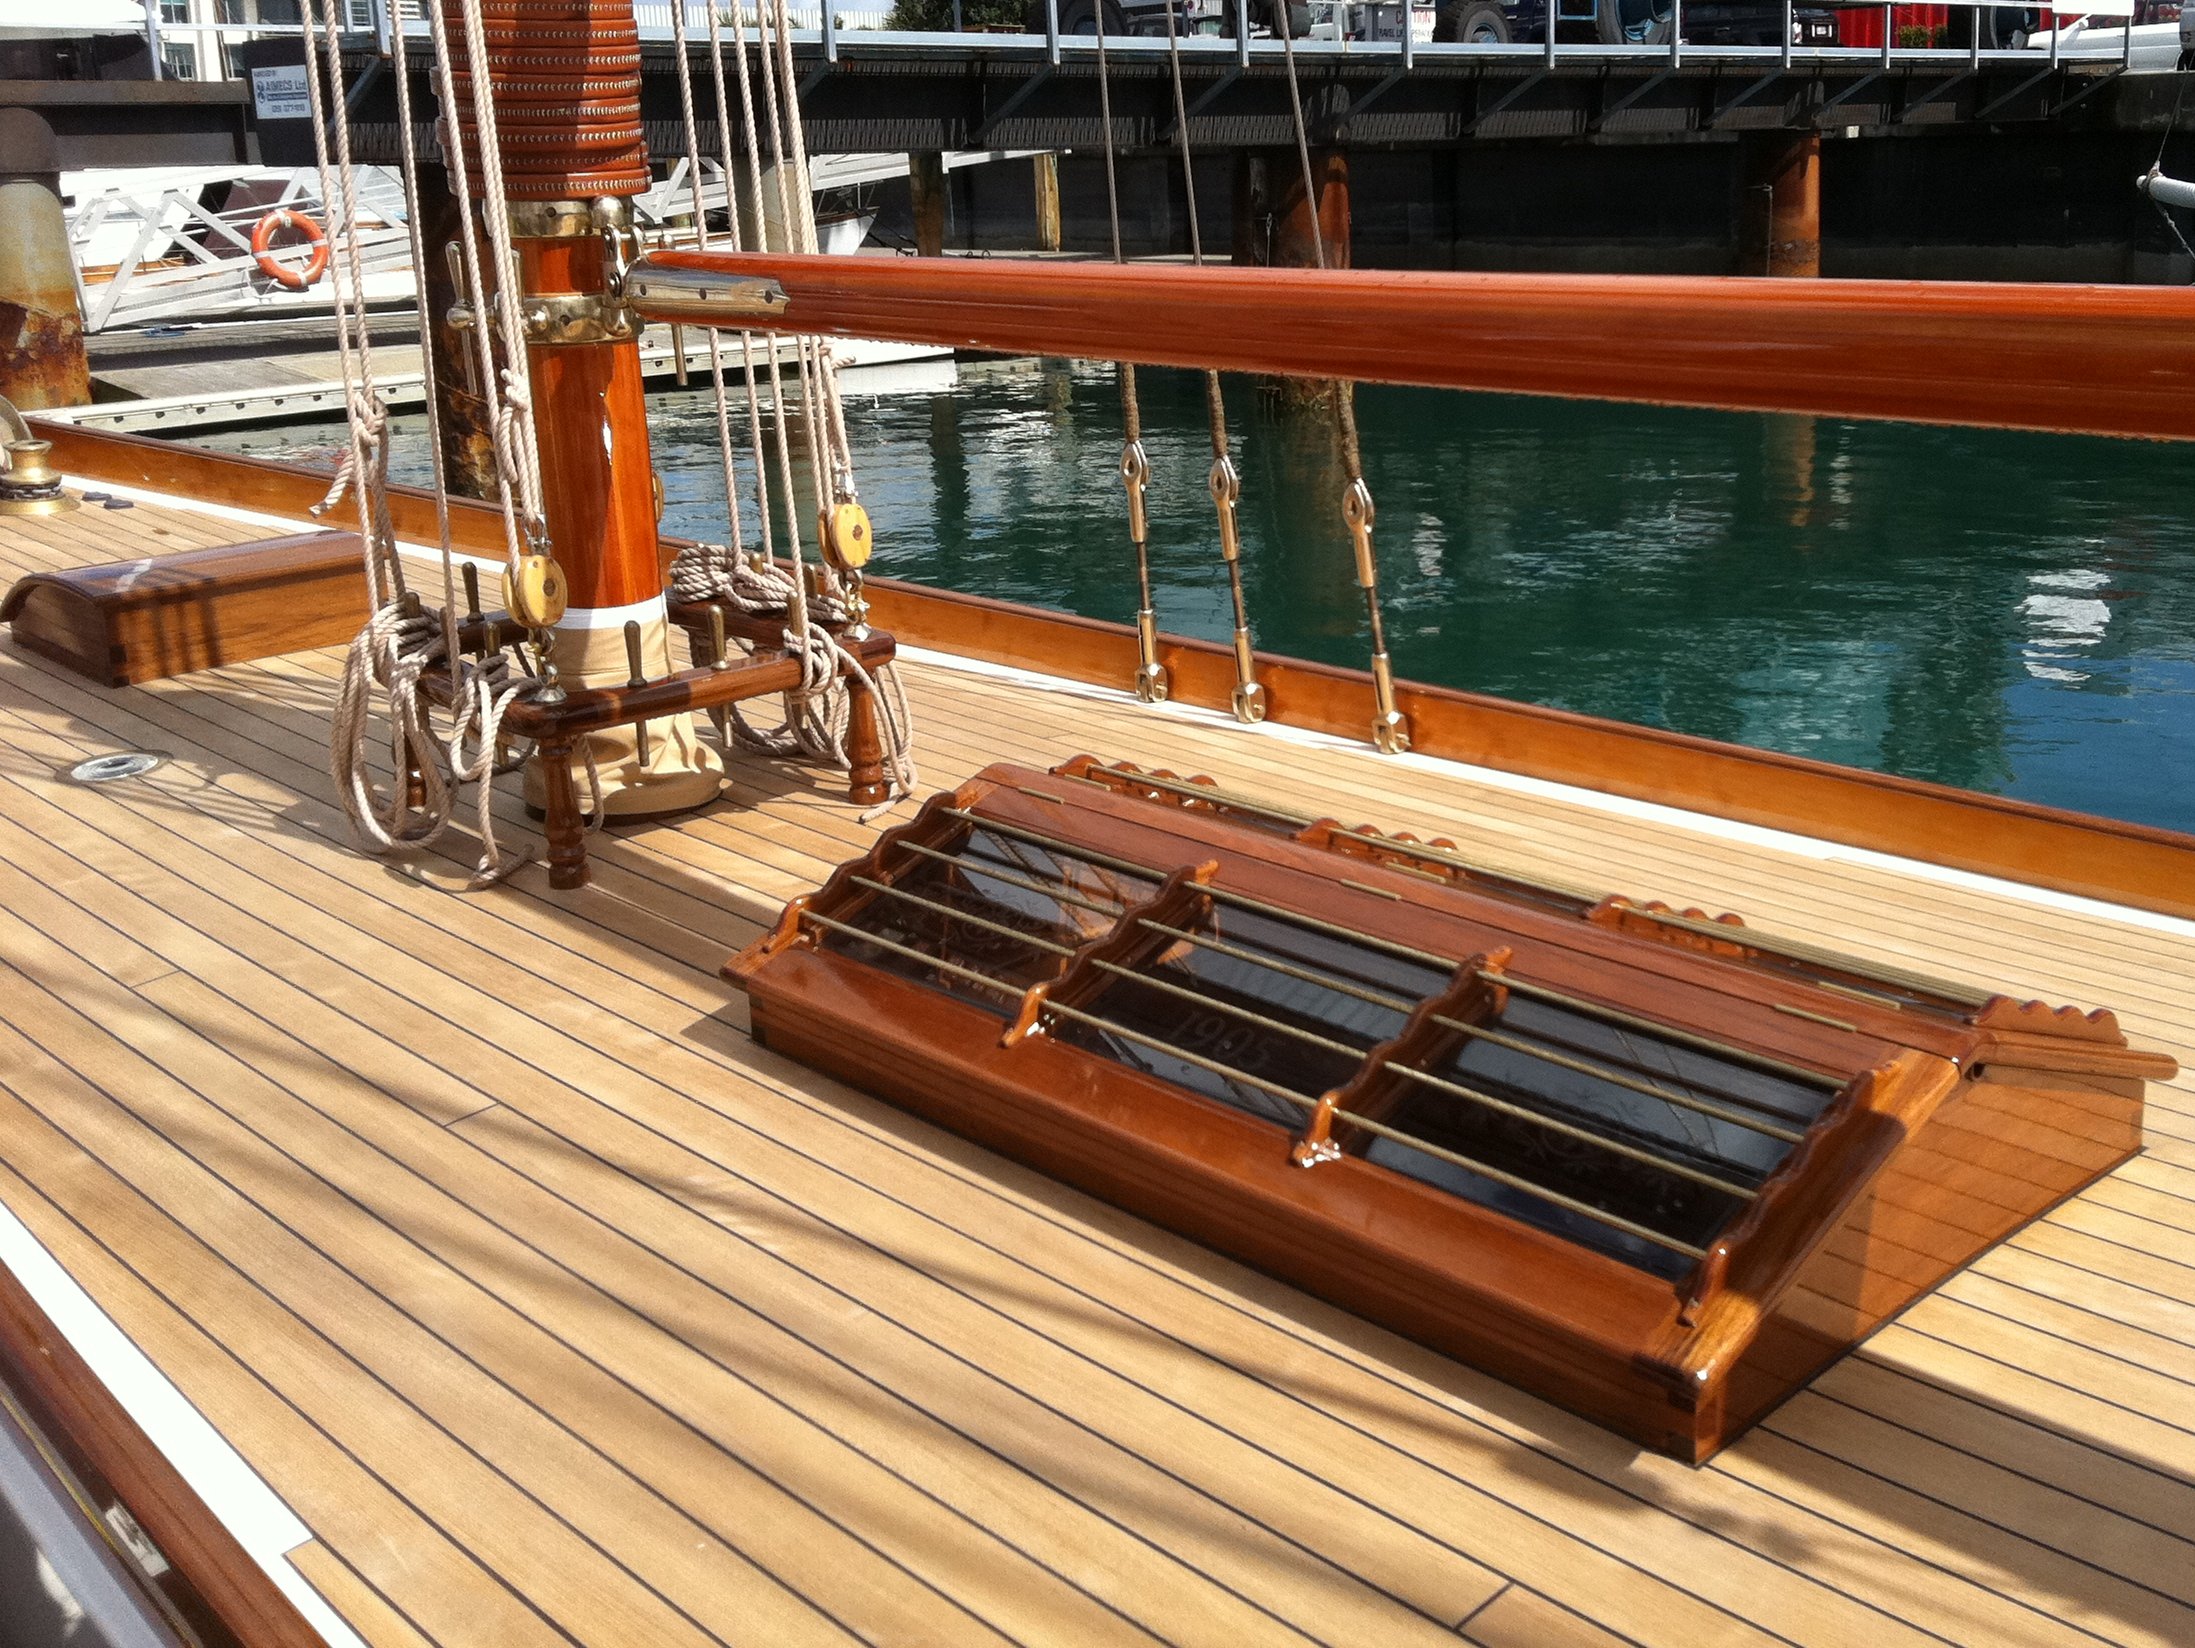 Should You Buy A Wooden Sailboat To Go Cruising? – LIFE AS 